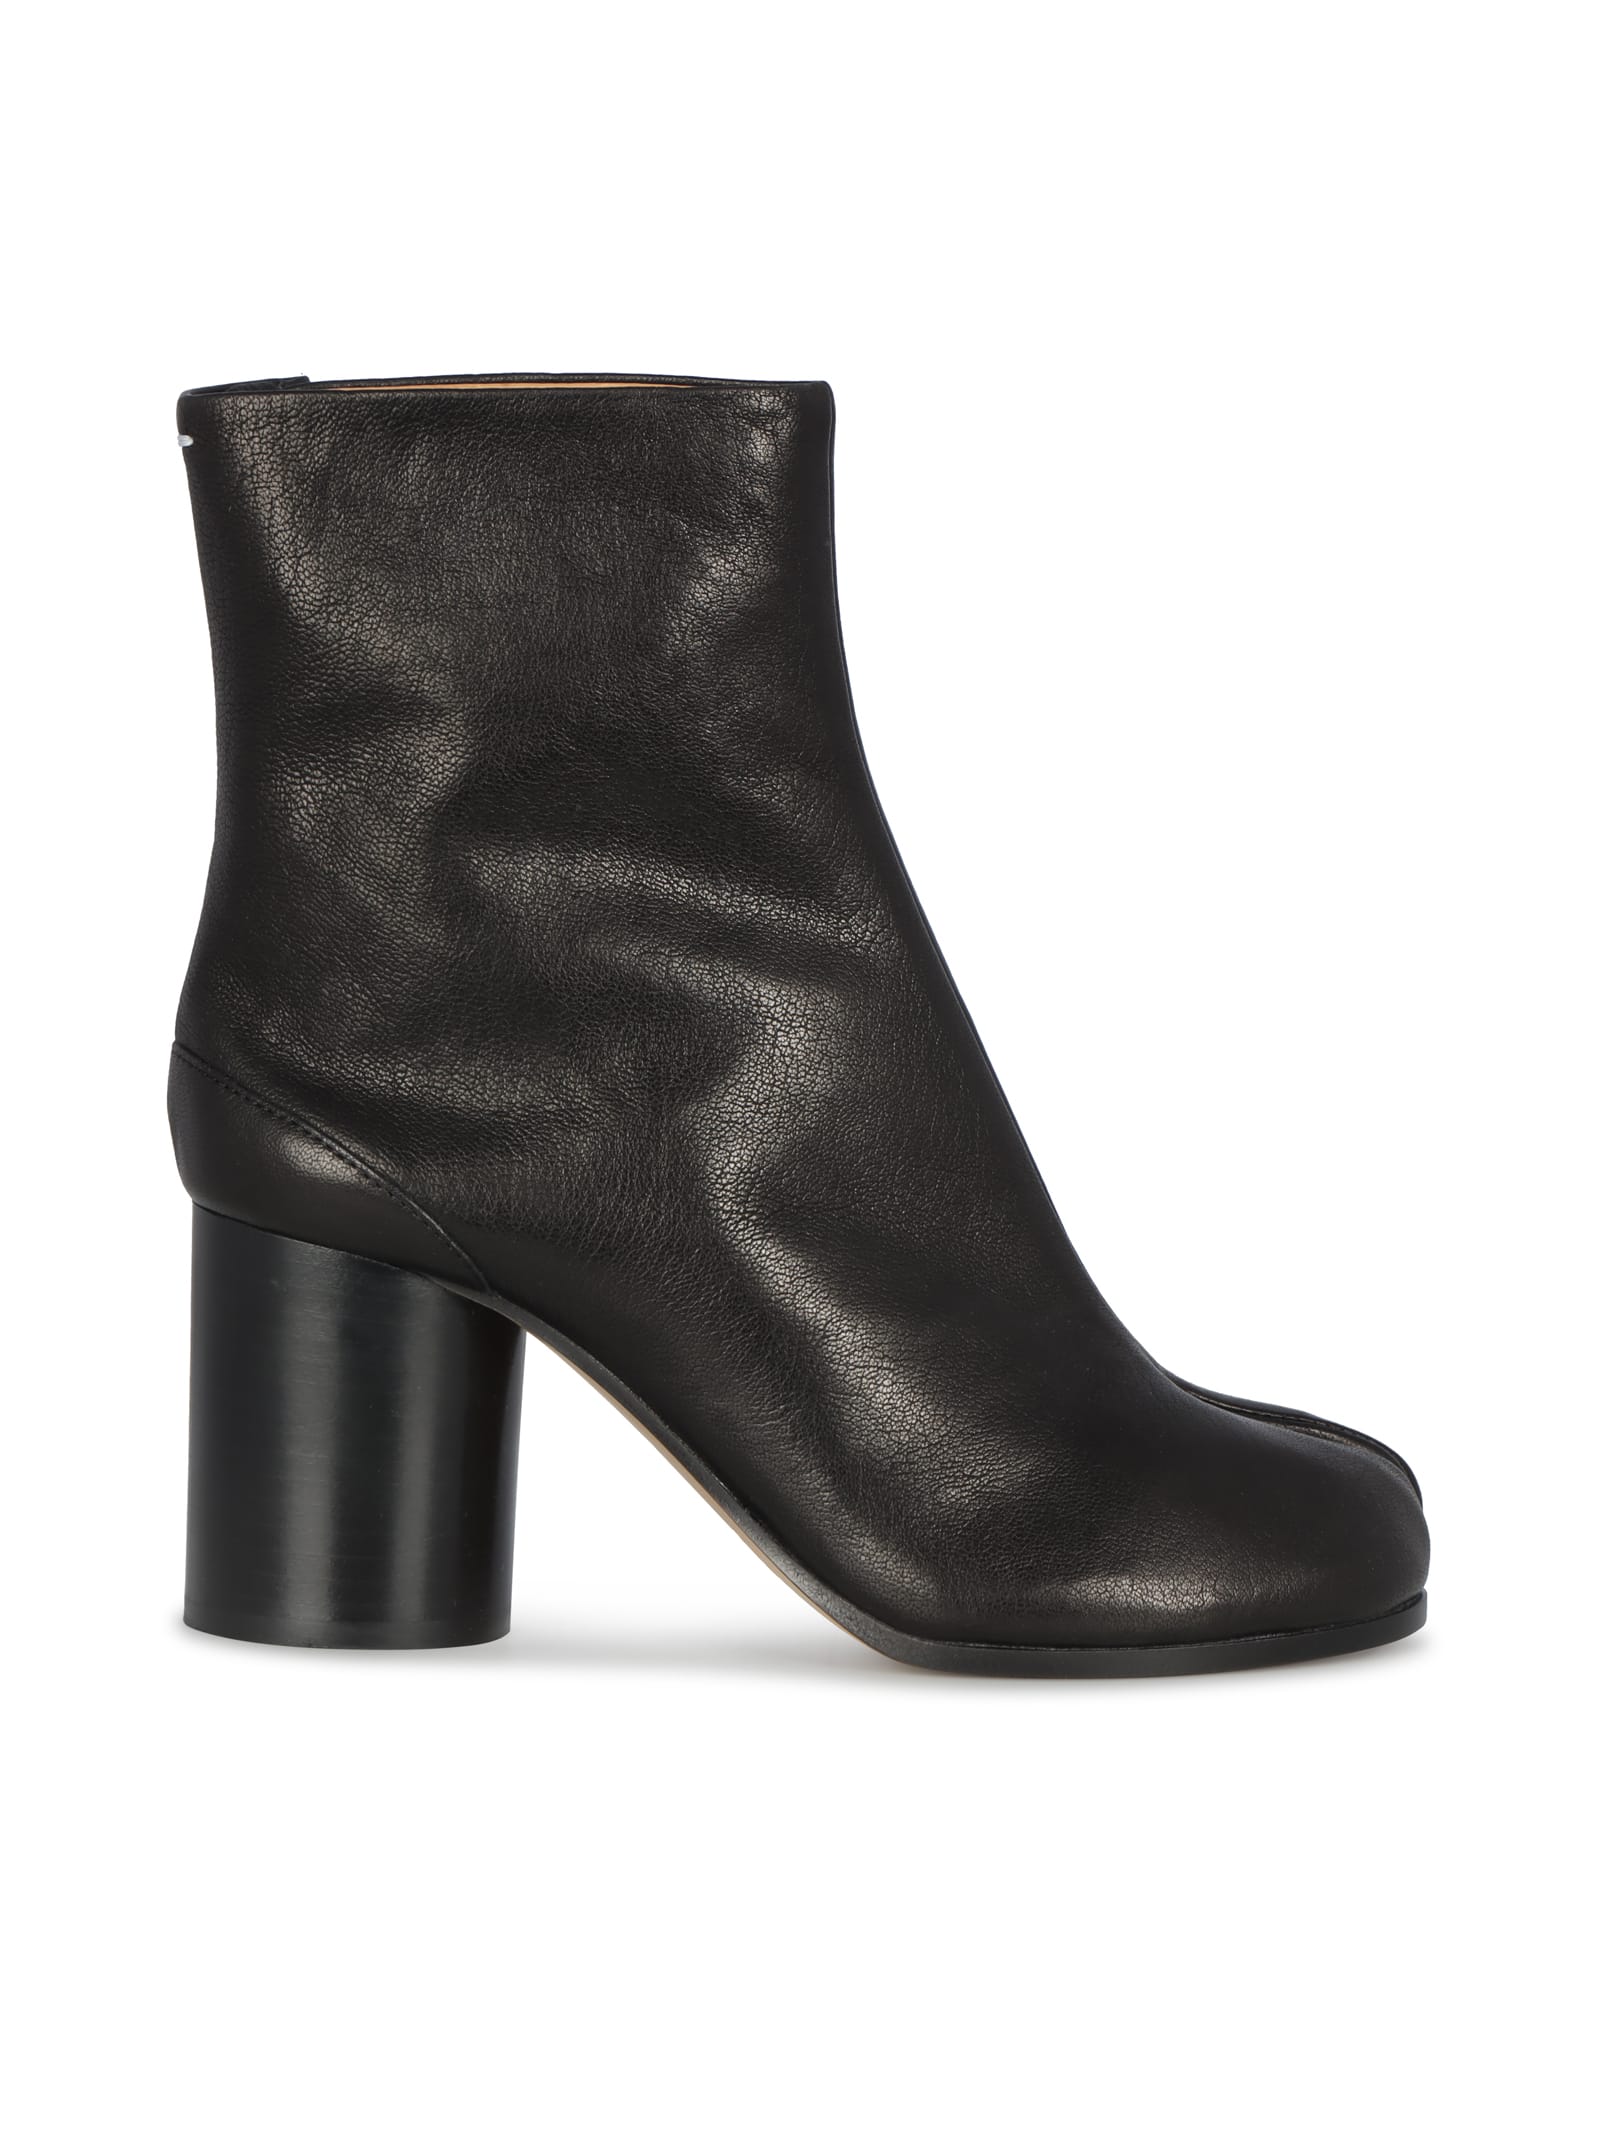 Maison Margiela Tabi Ankle Boots H80 In Black